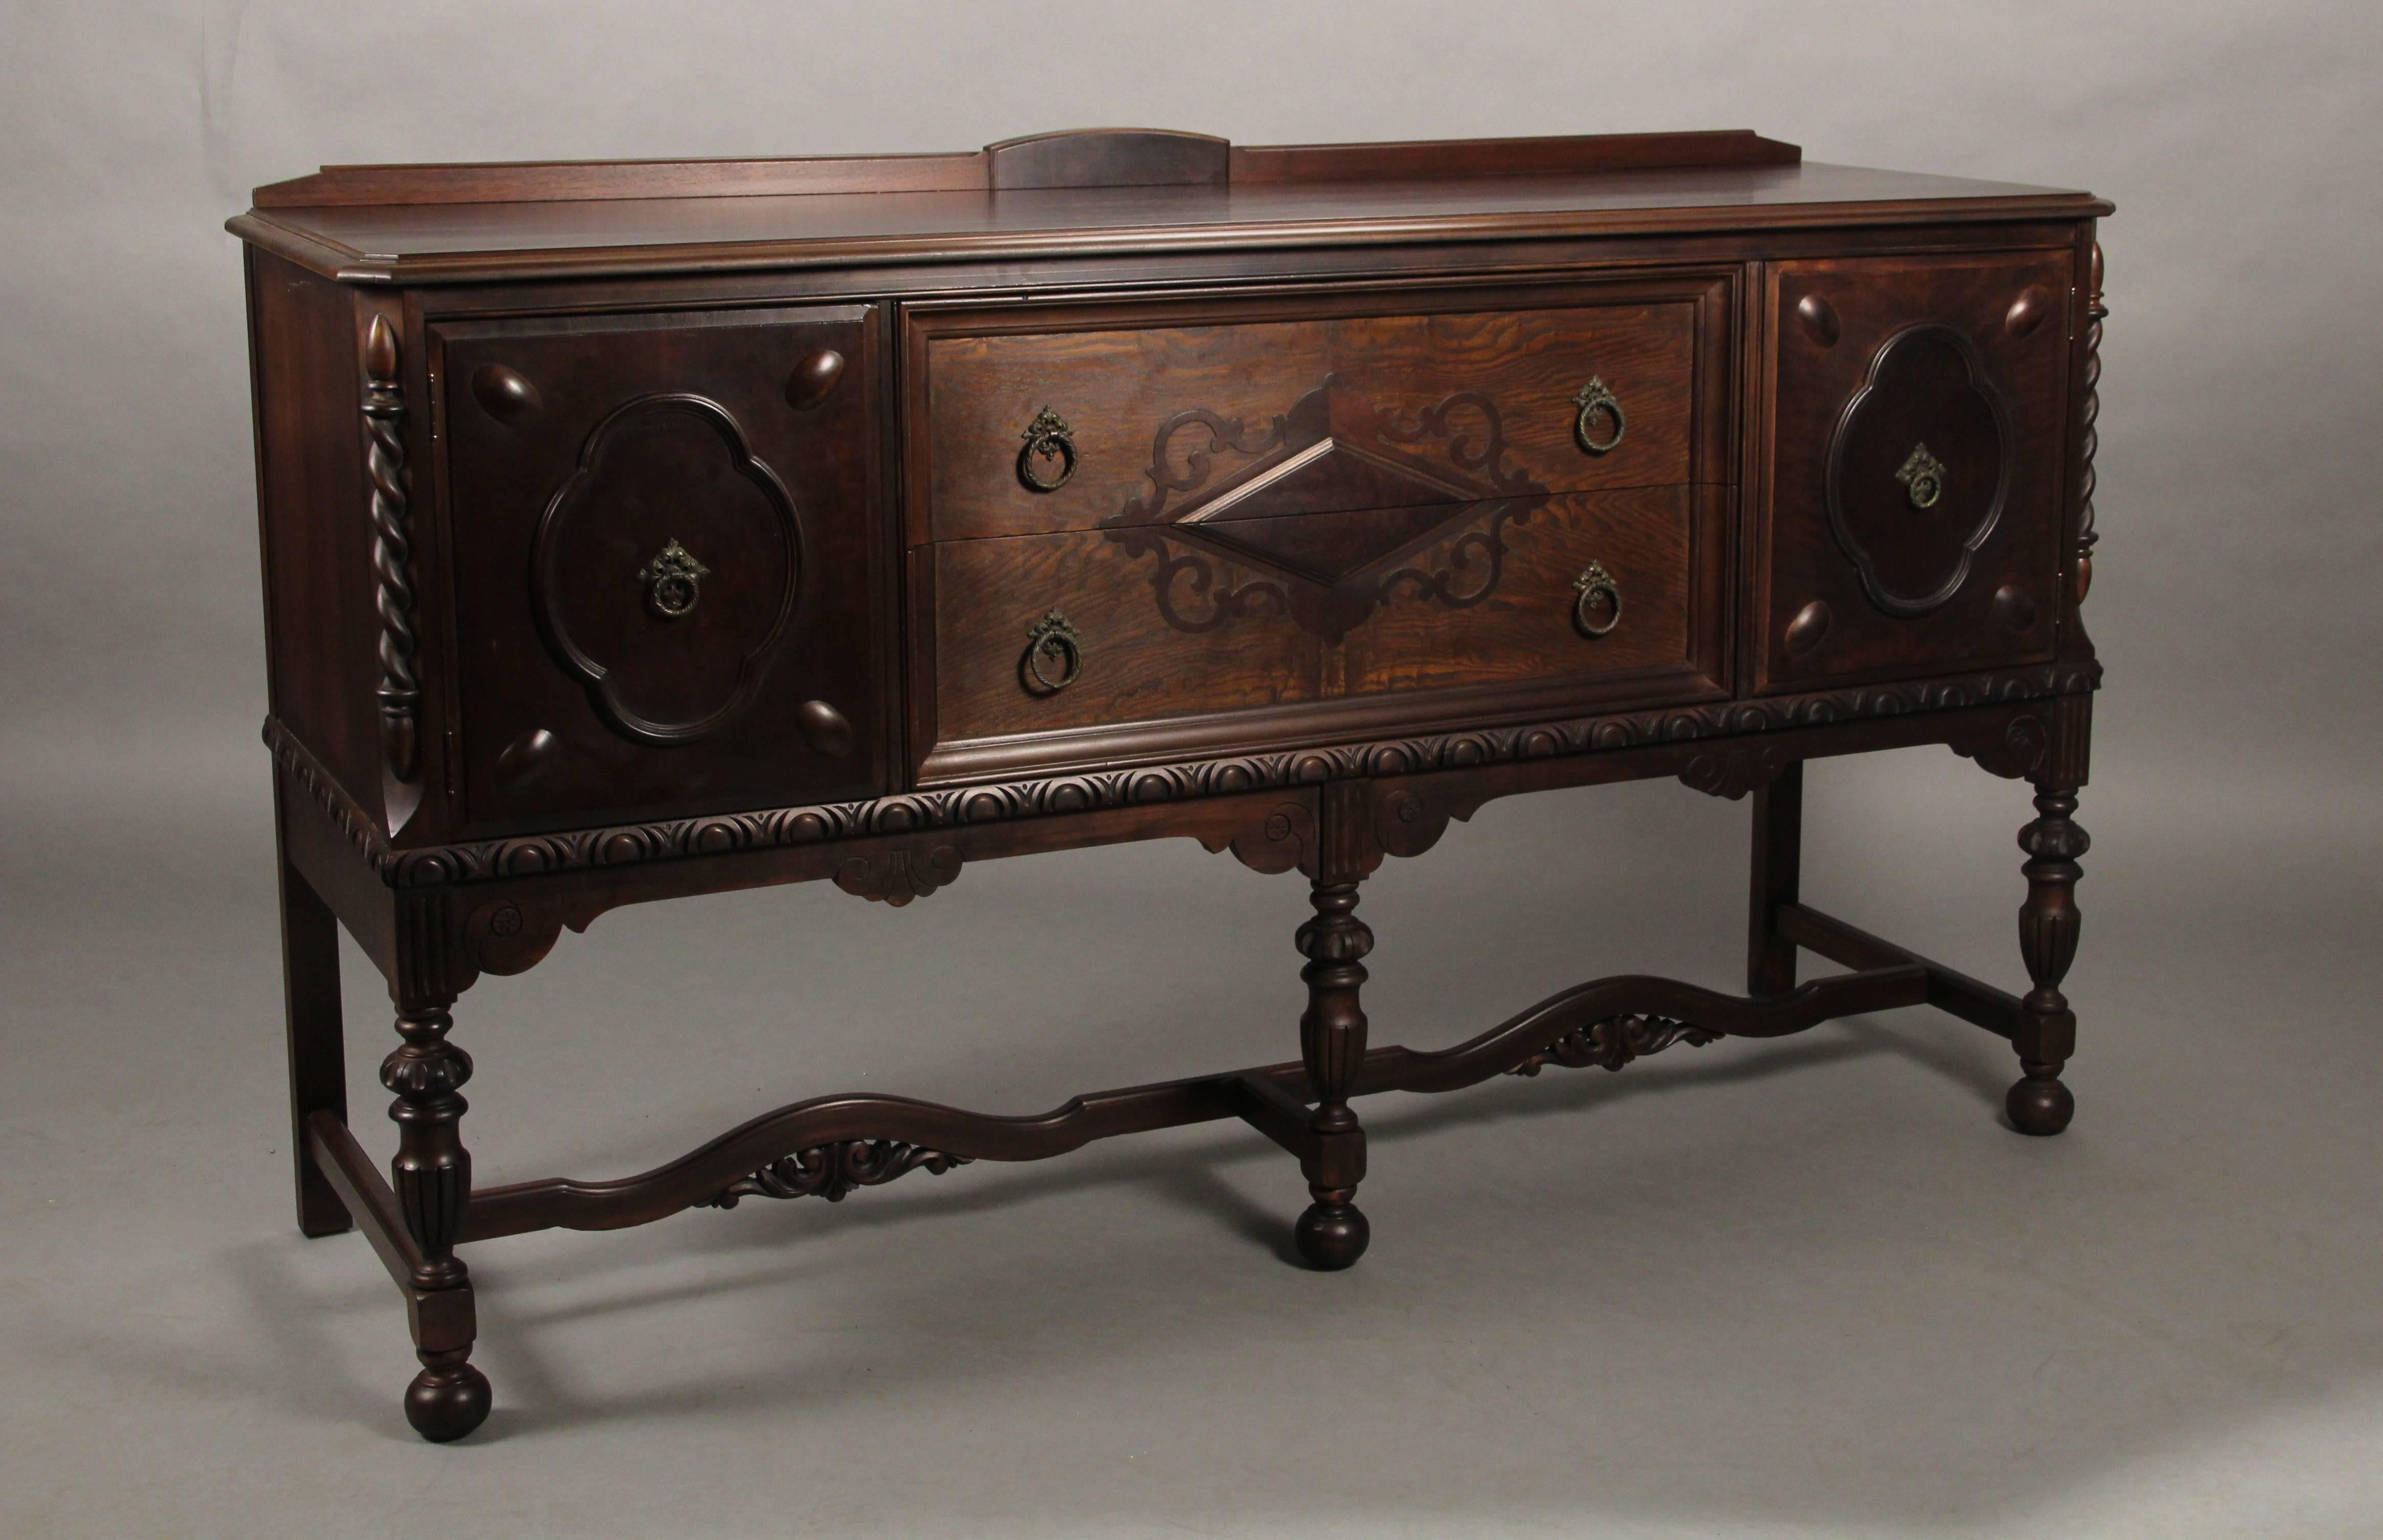 Attractive 1920s carved walnut sideboard with two drawers and two doors. Measures: 39.25